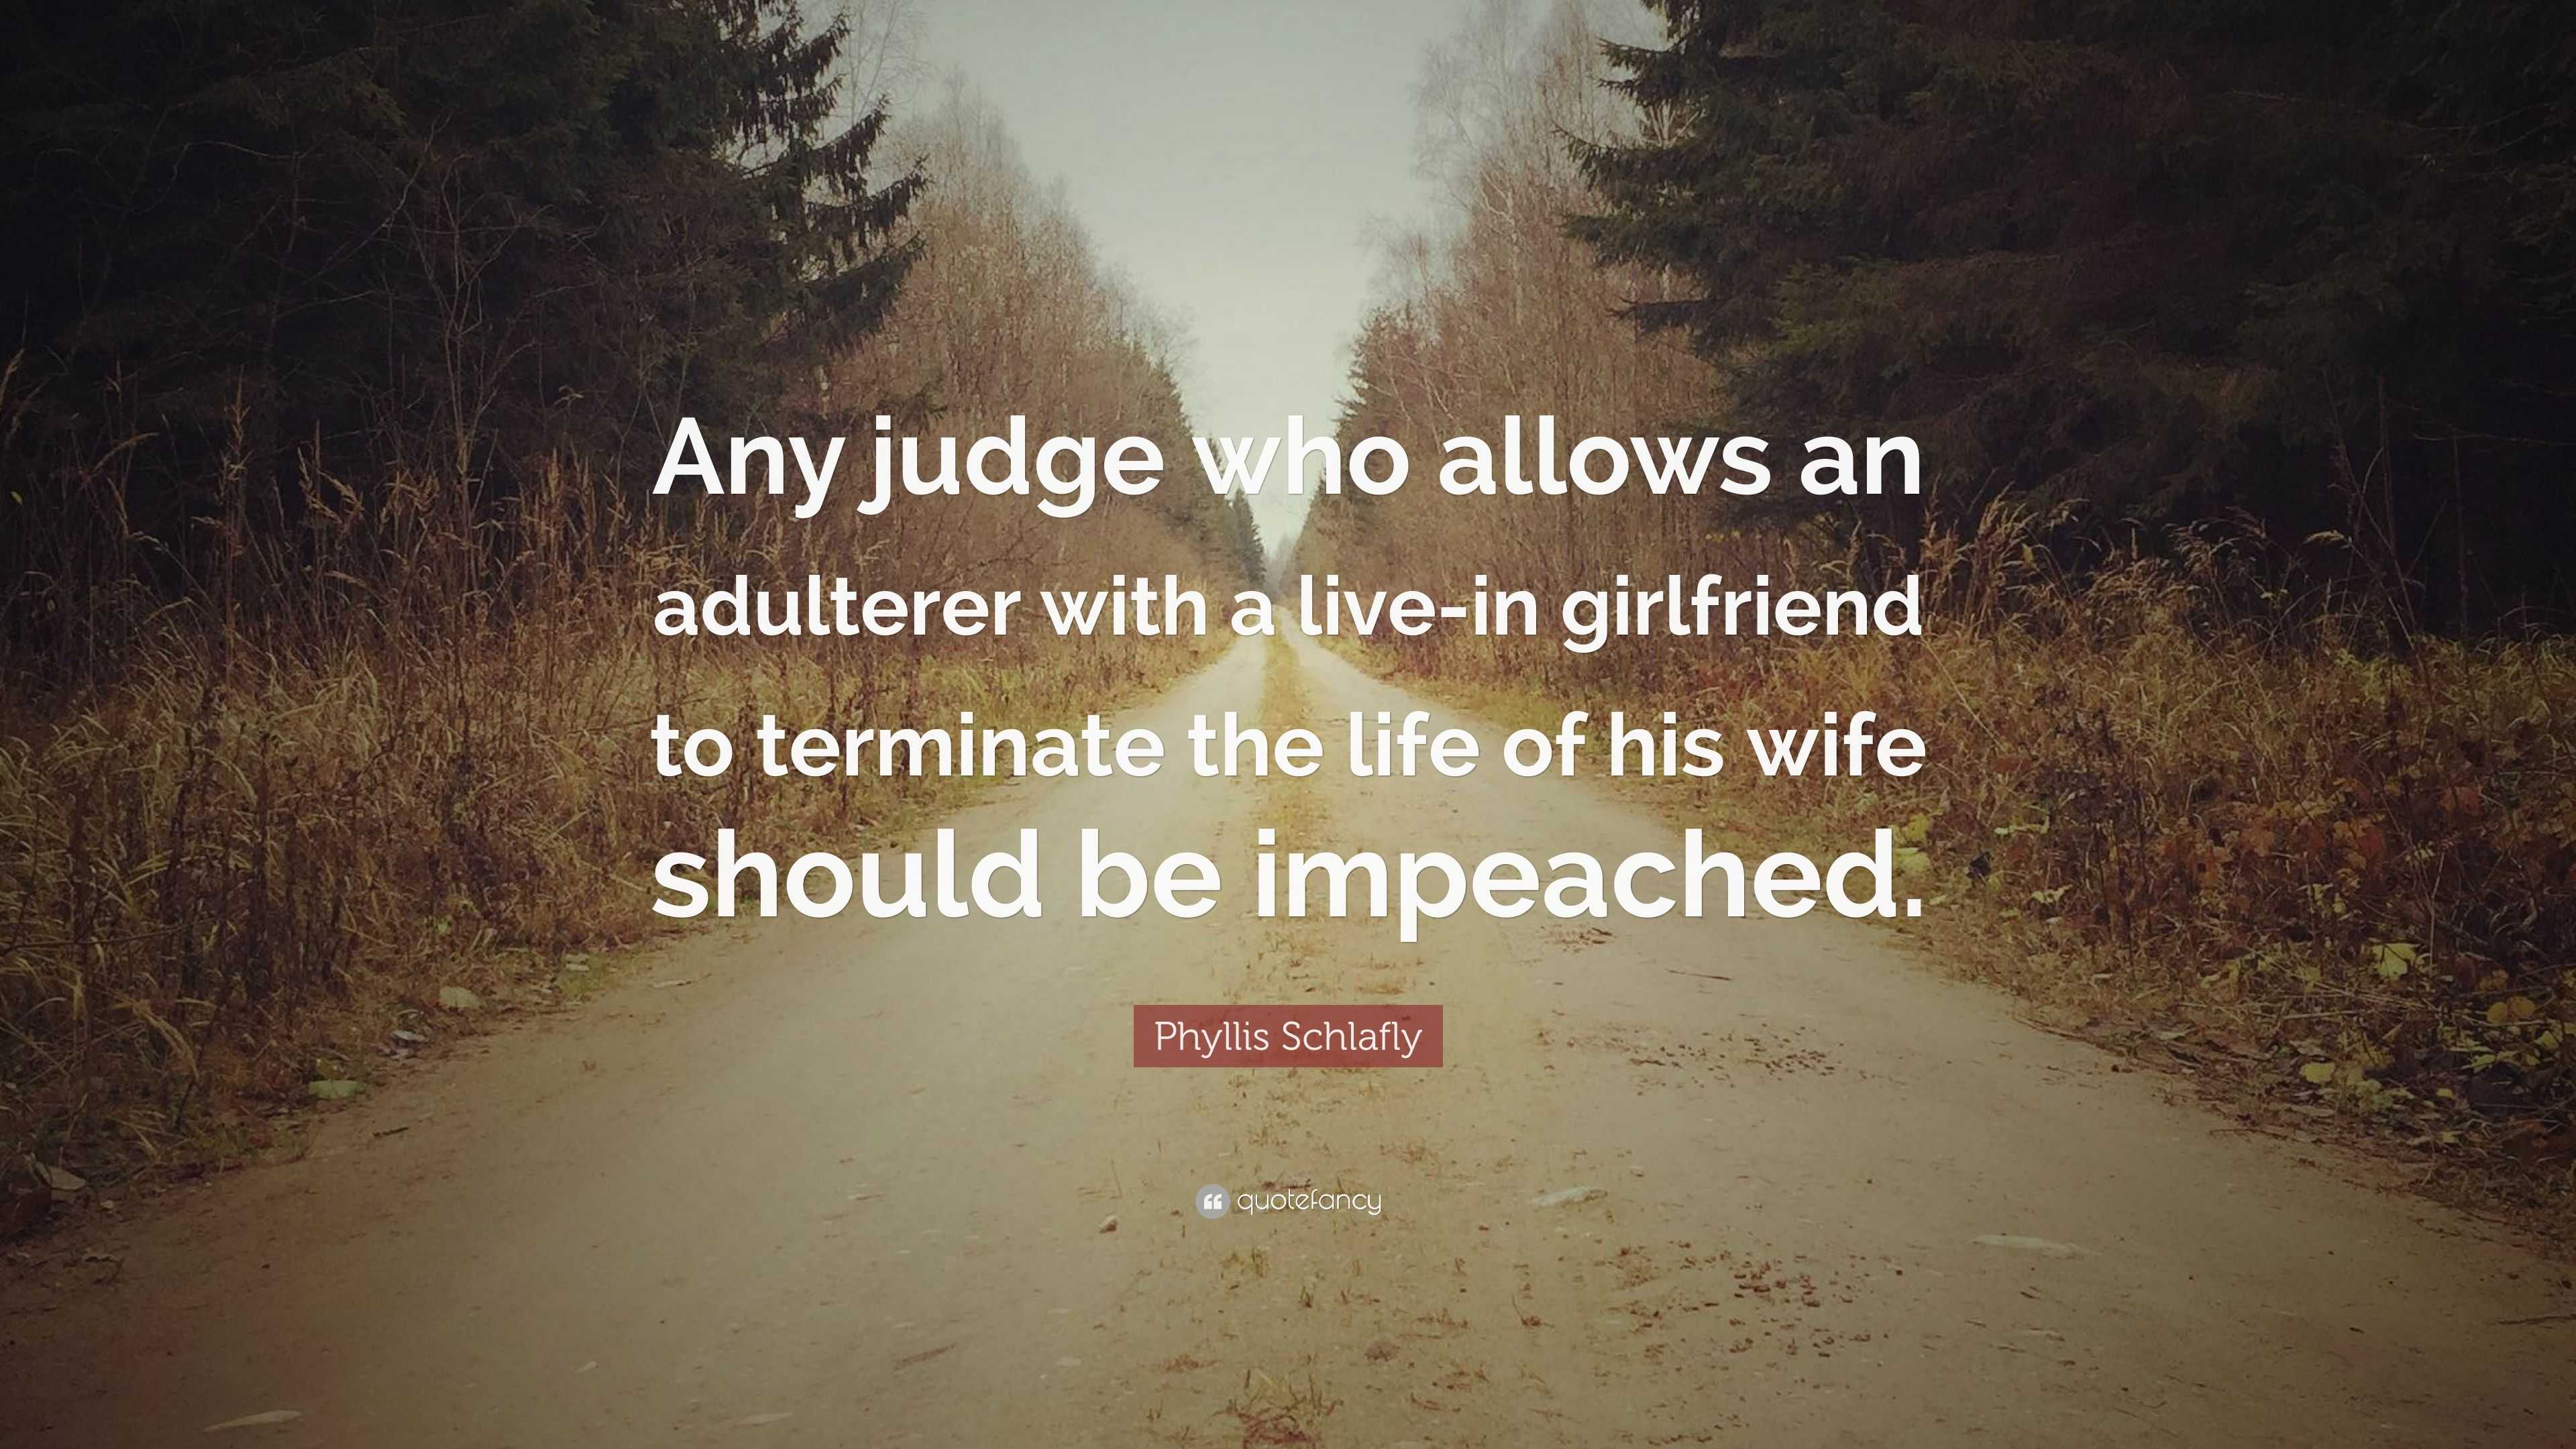 Phyllis Schlafly Quote “any Judge Who Allows An Adulterer With A Live In Girlfriend To